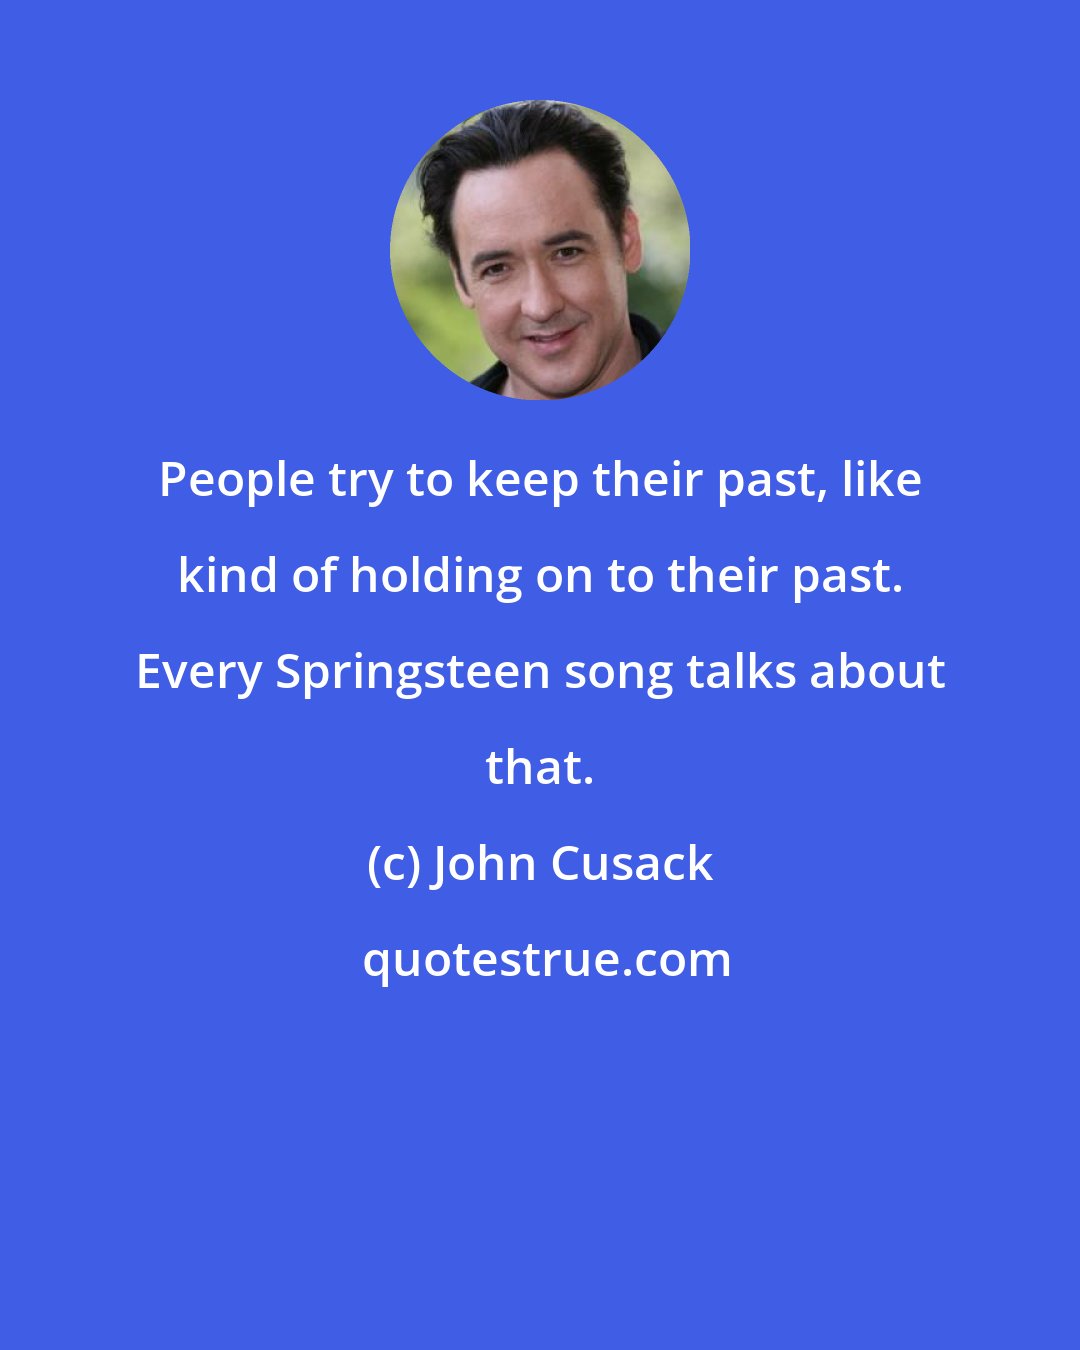 John Cusack: People try to keep their past, like kind of holding on to their past. Every Springsteen song talks about that.